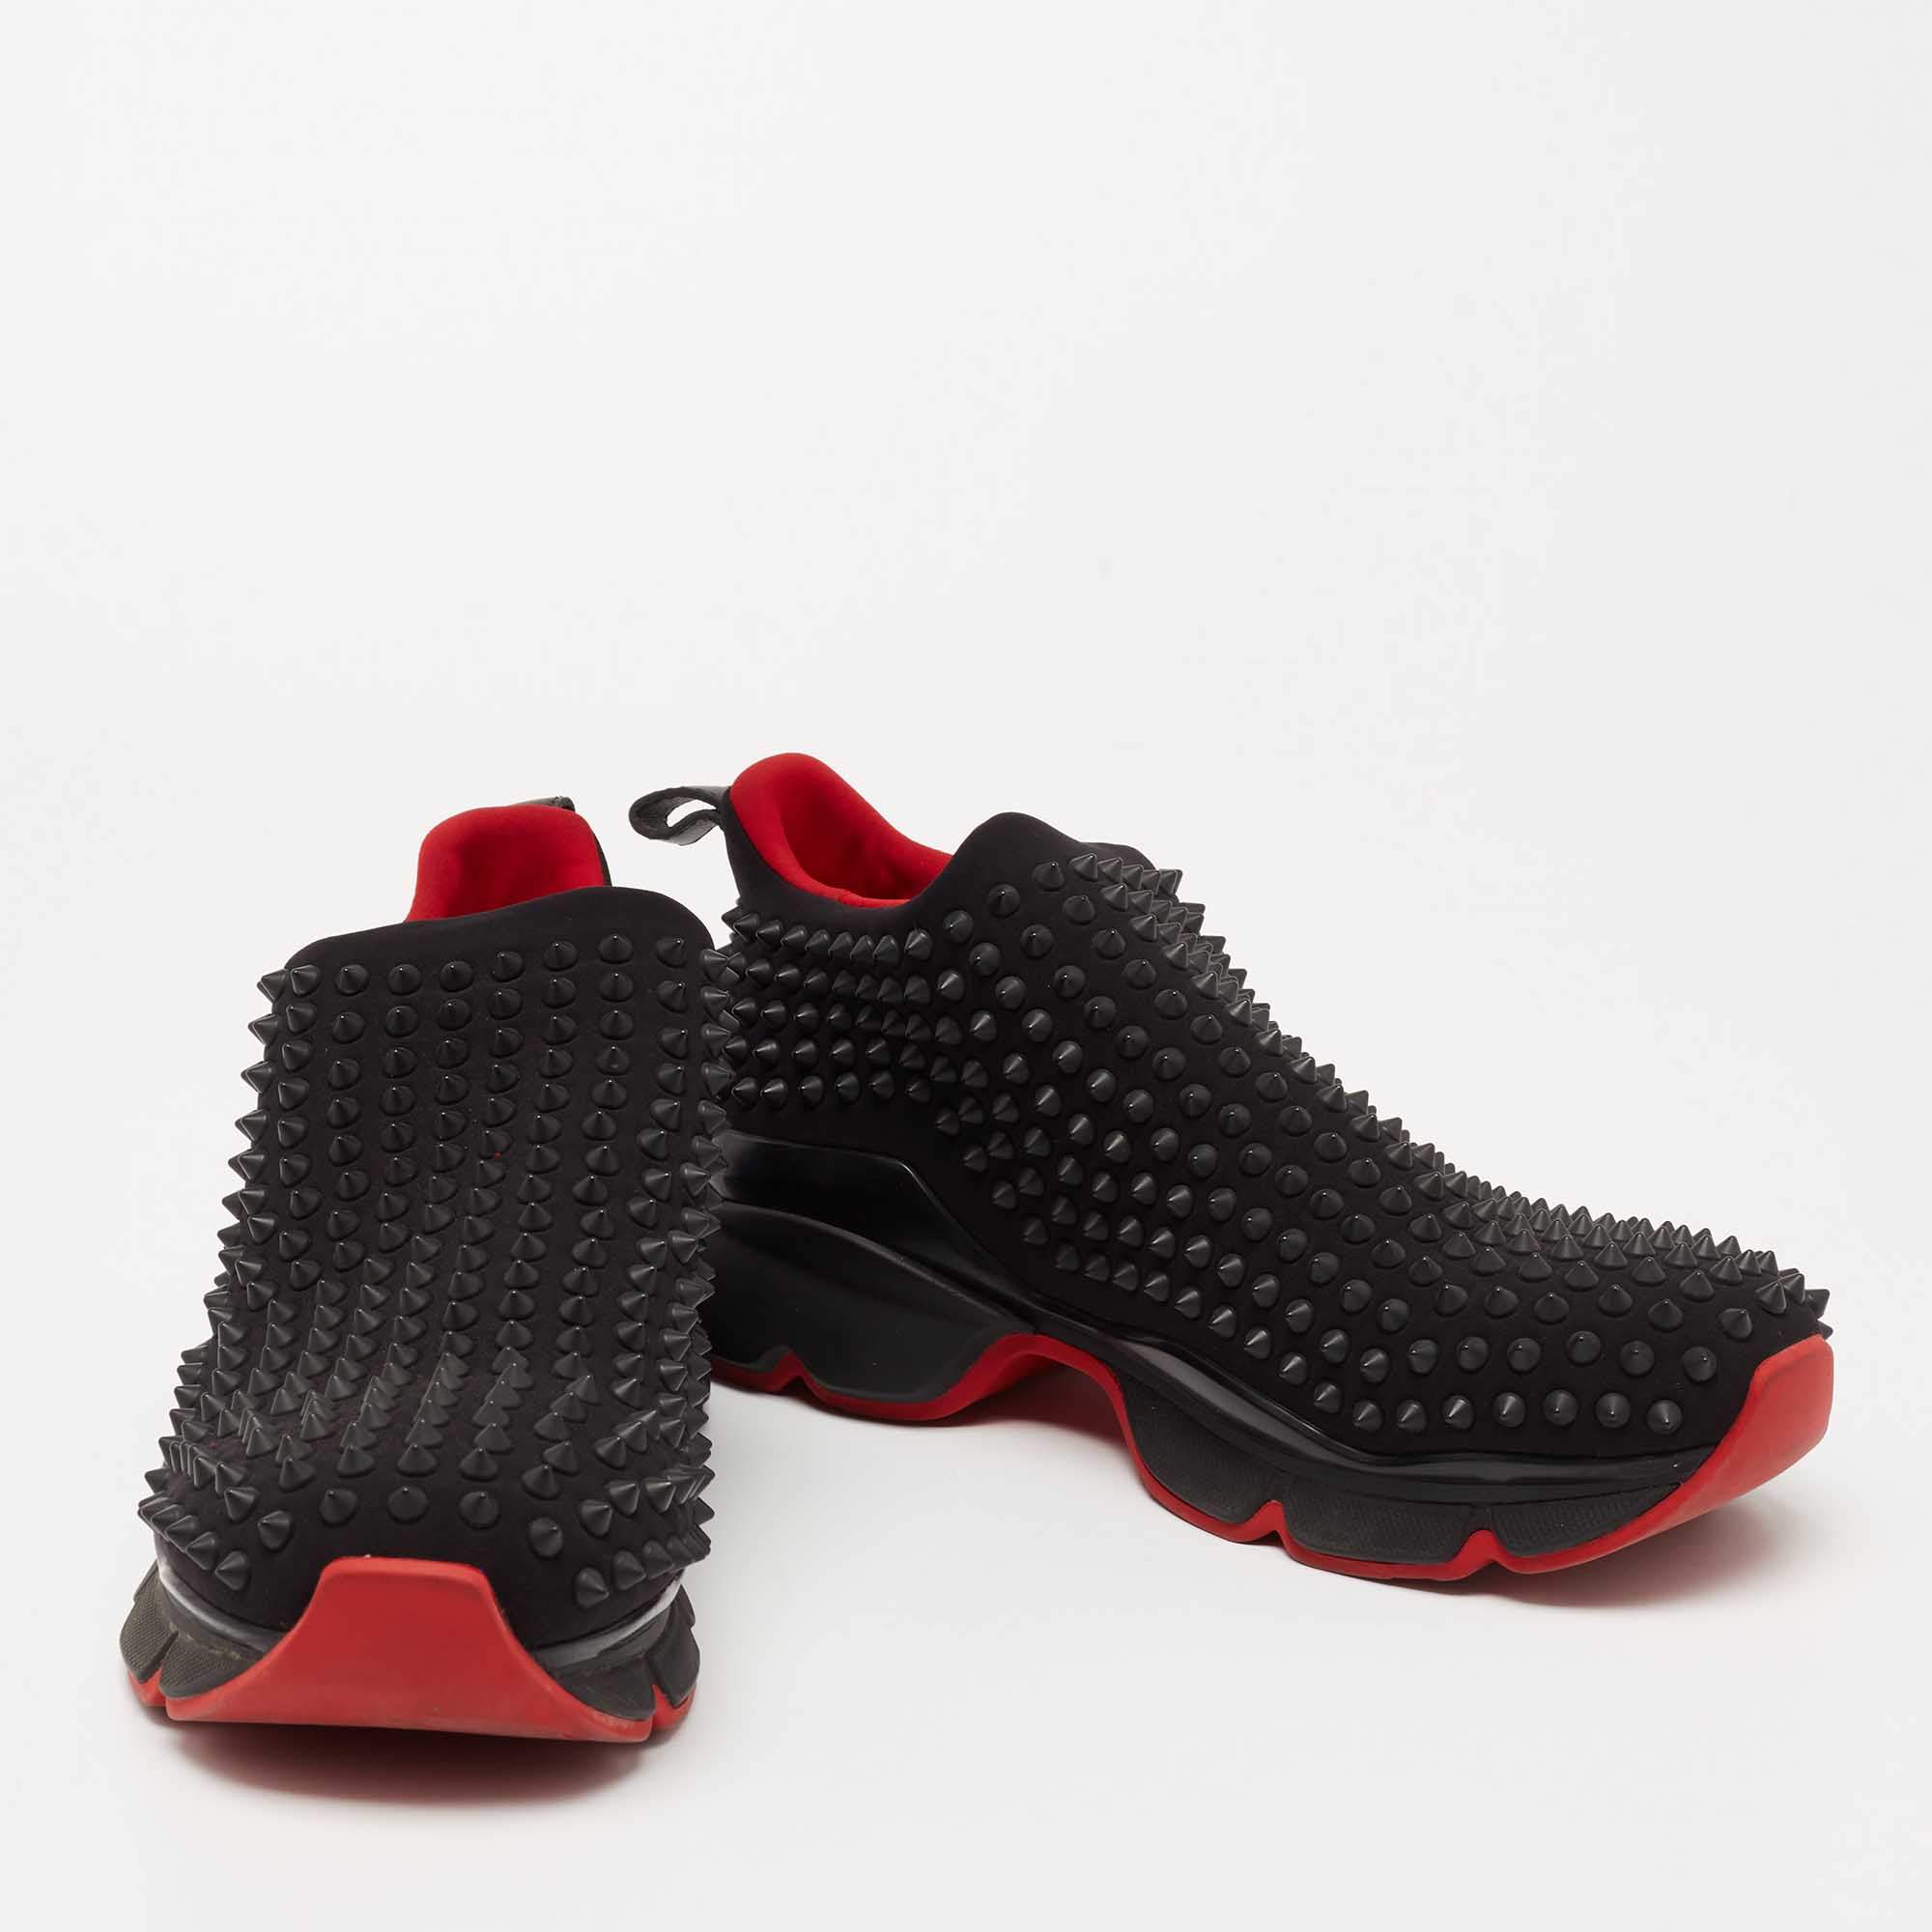 At once sporty and punk, the Spike Sock sneakers from Christian